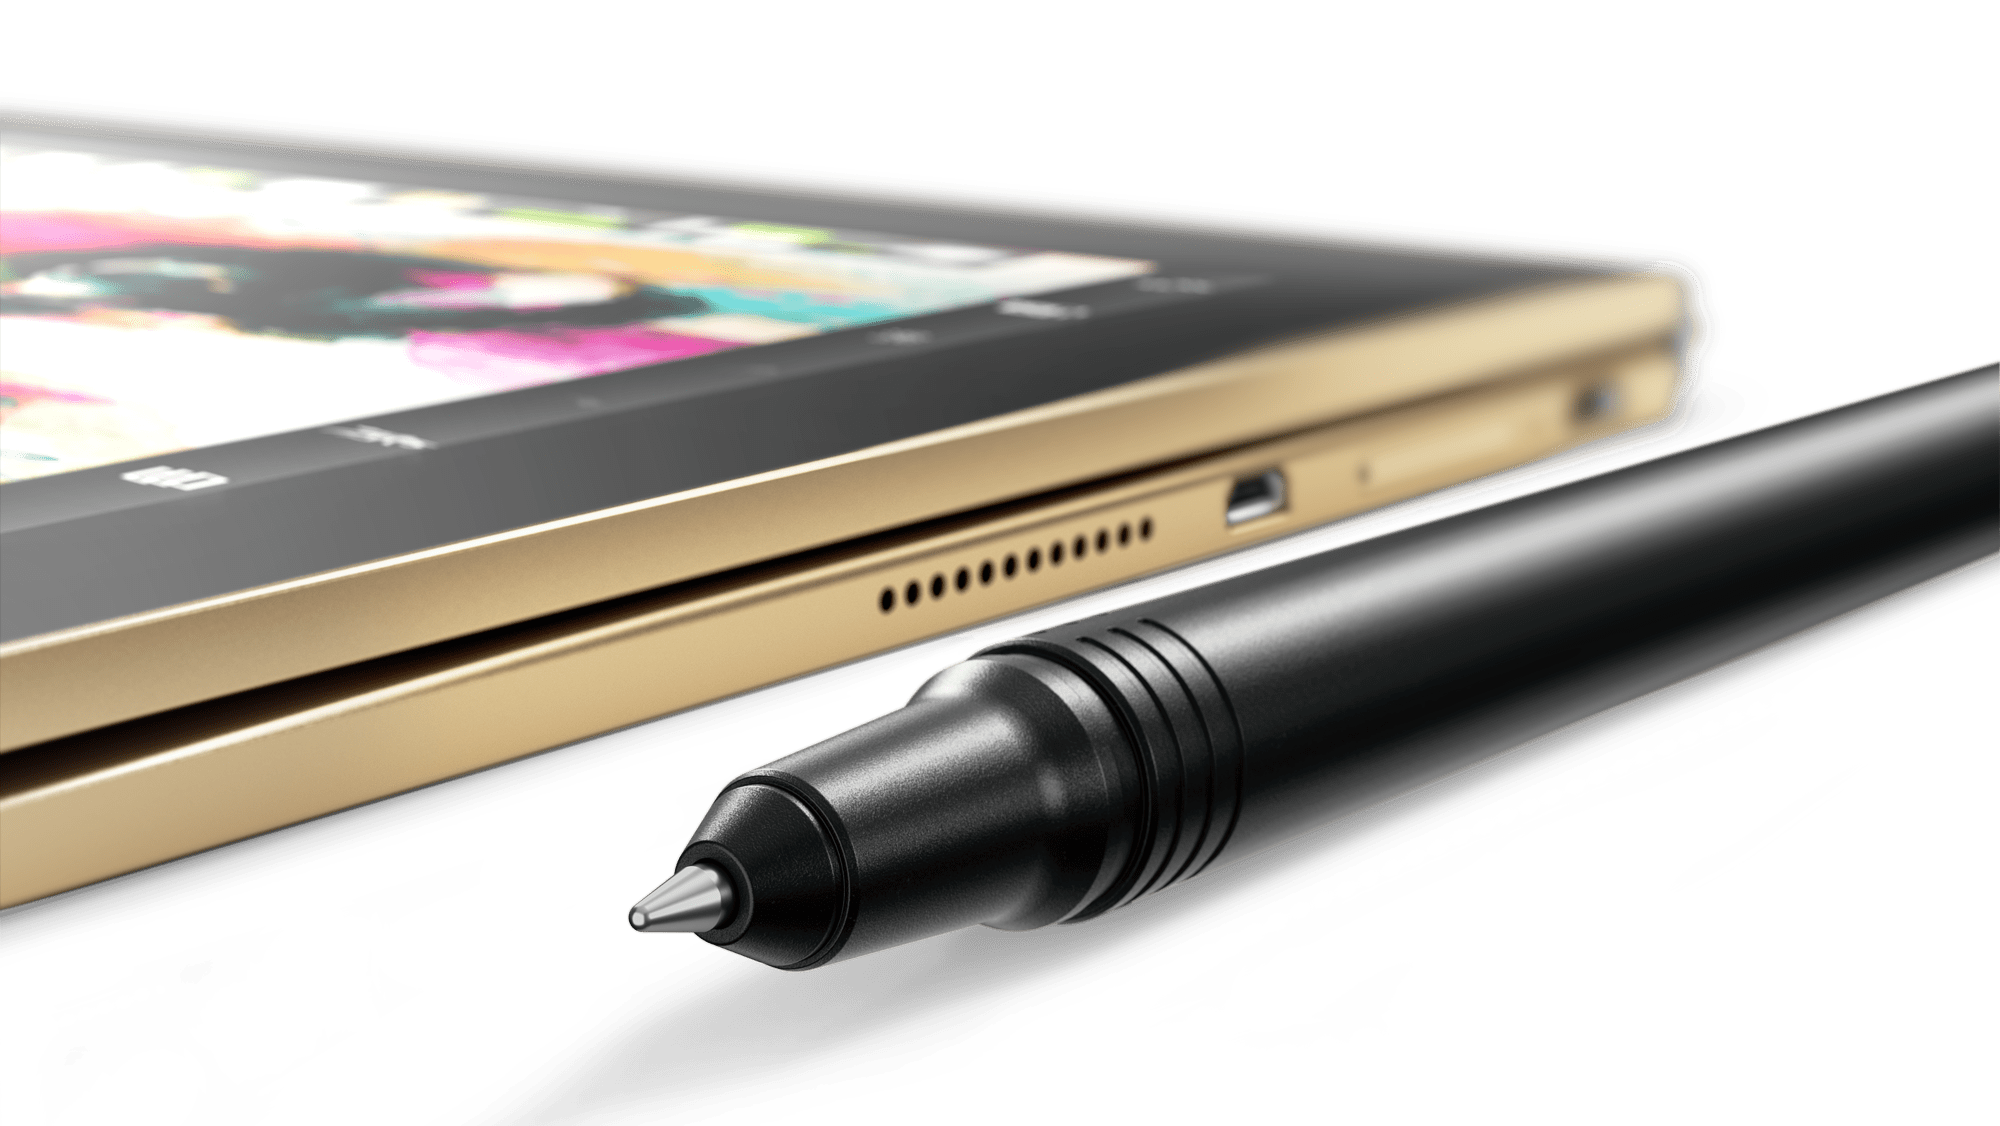 Lenovo Launches Yoga Book A Tablet With Touch Keyboard Stylus That Turns Written Ink Into Digital Notes